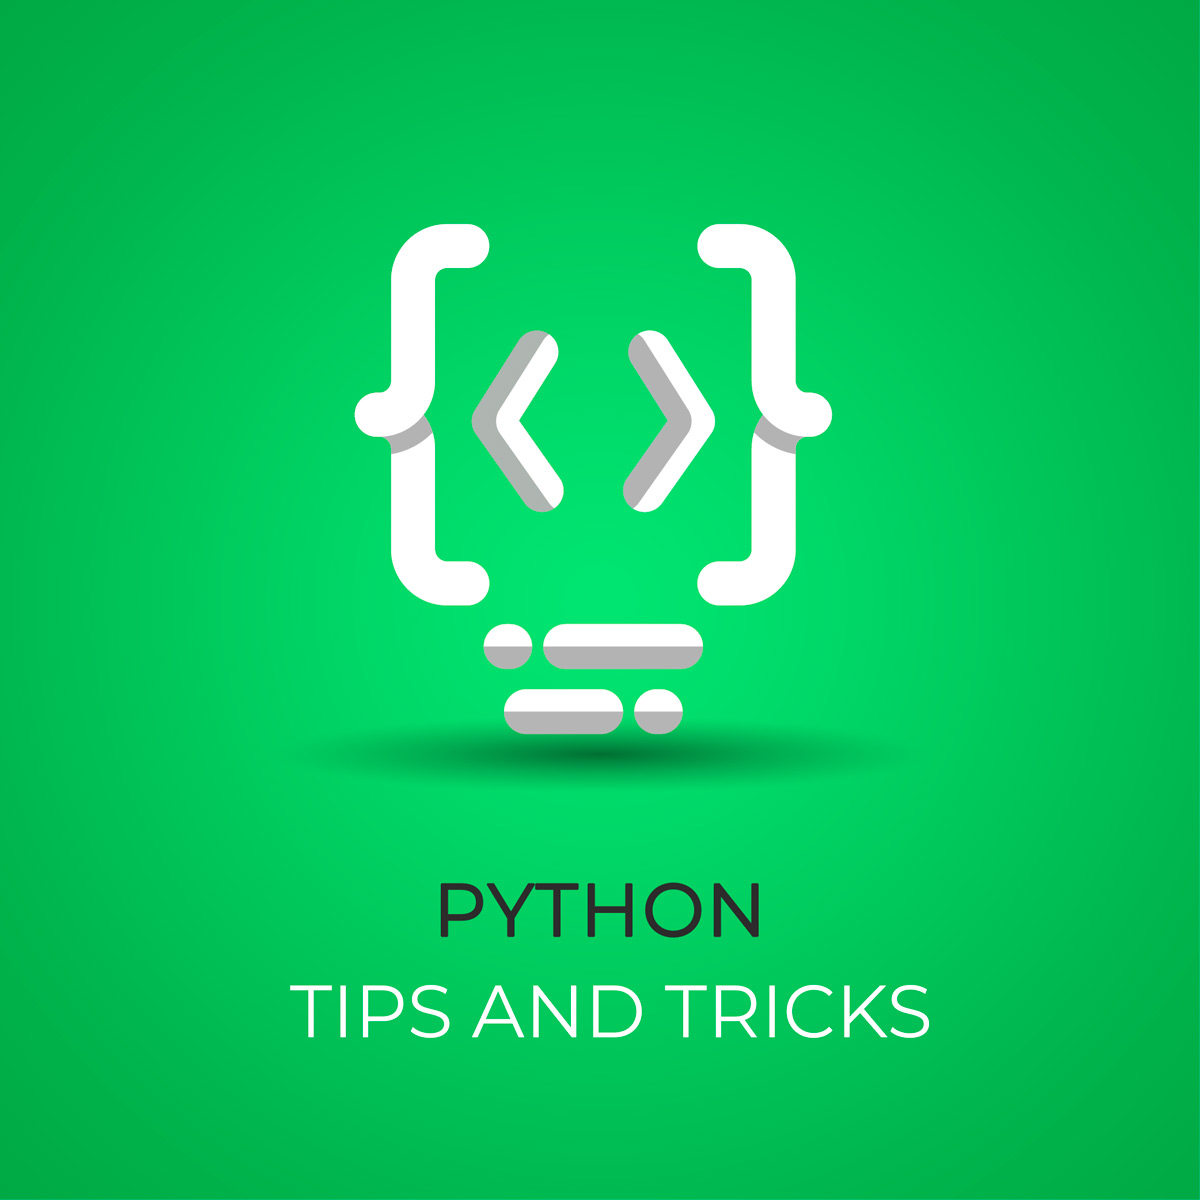 Useful tips for working with Python